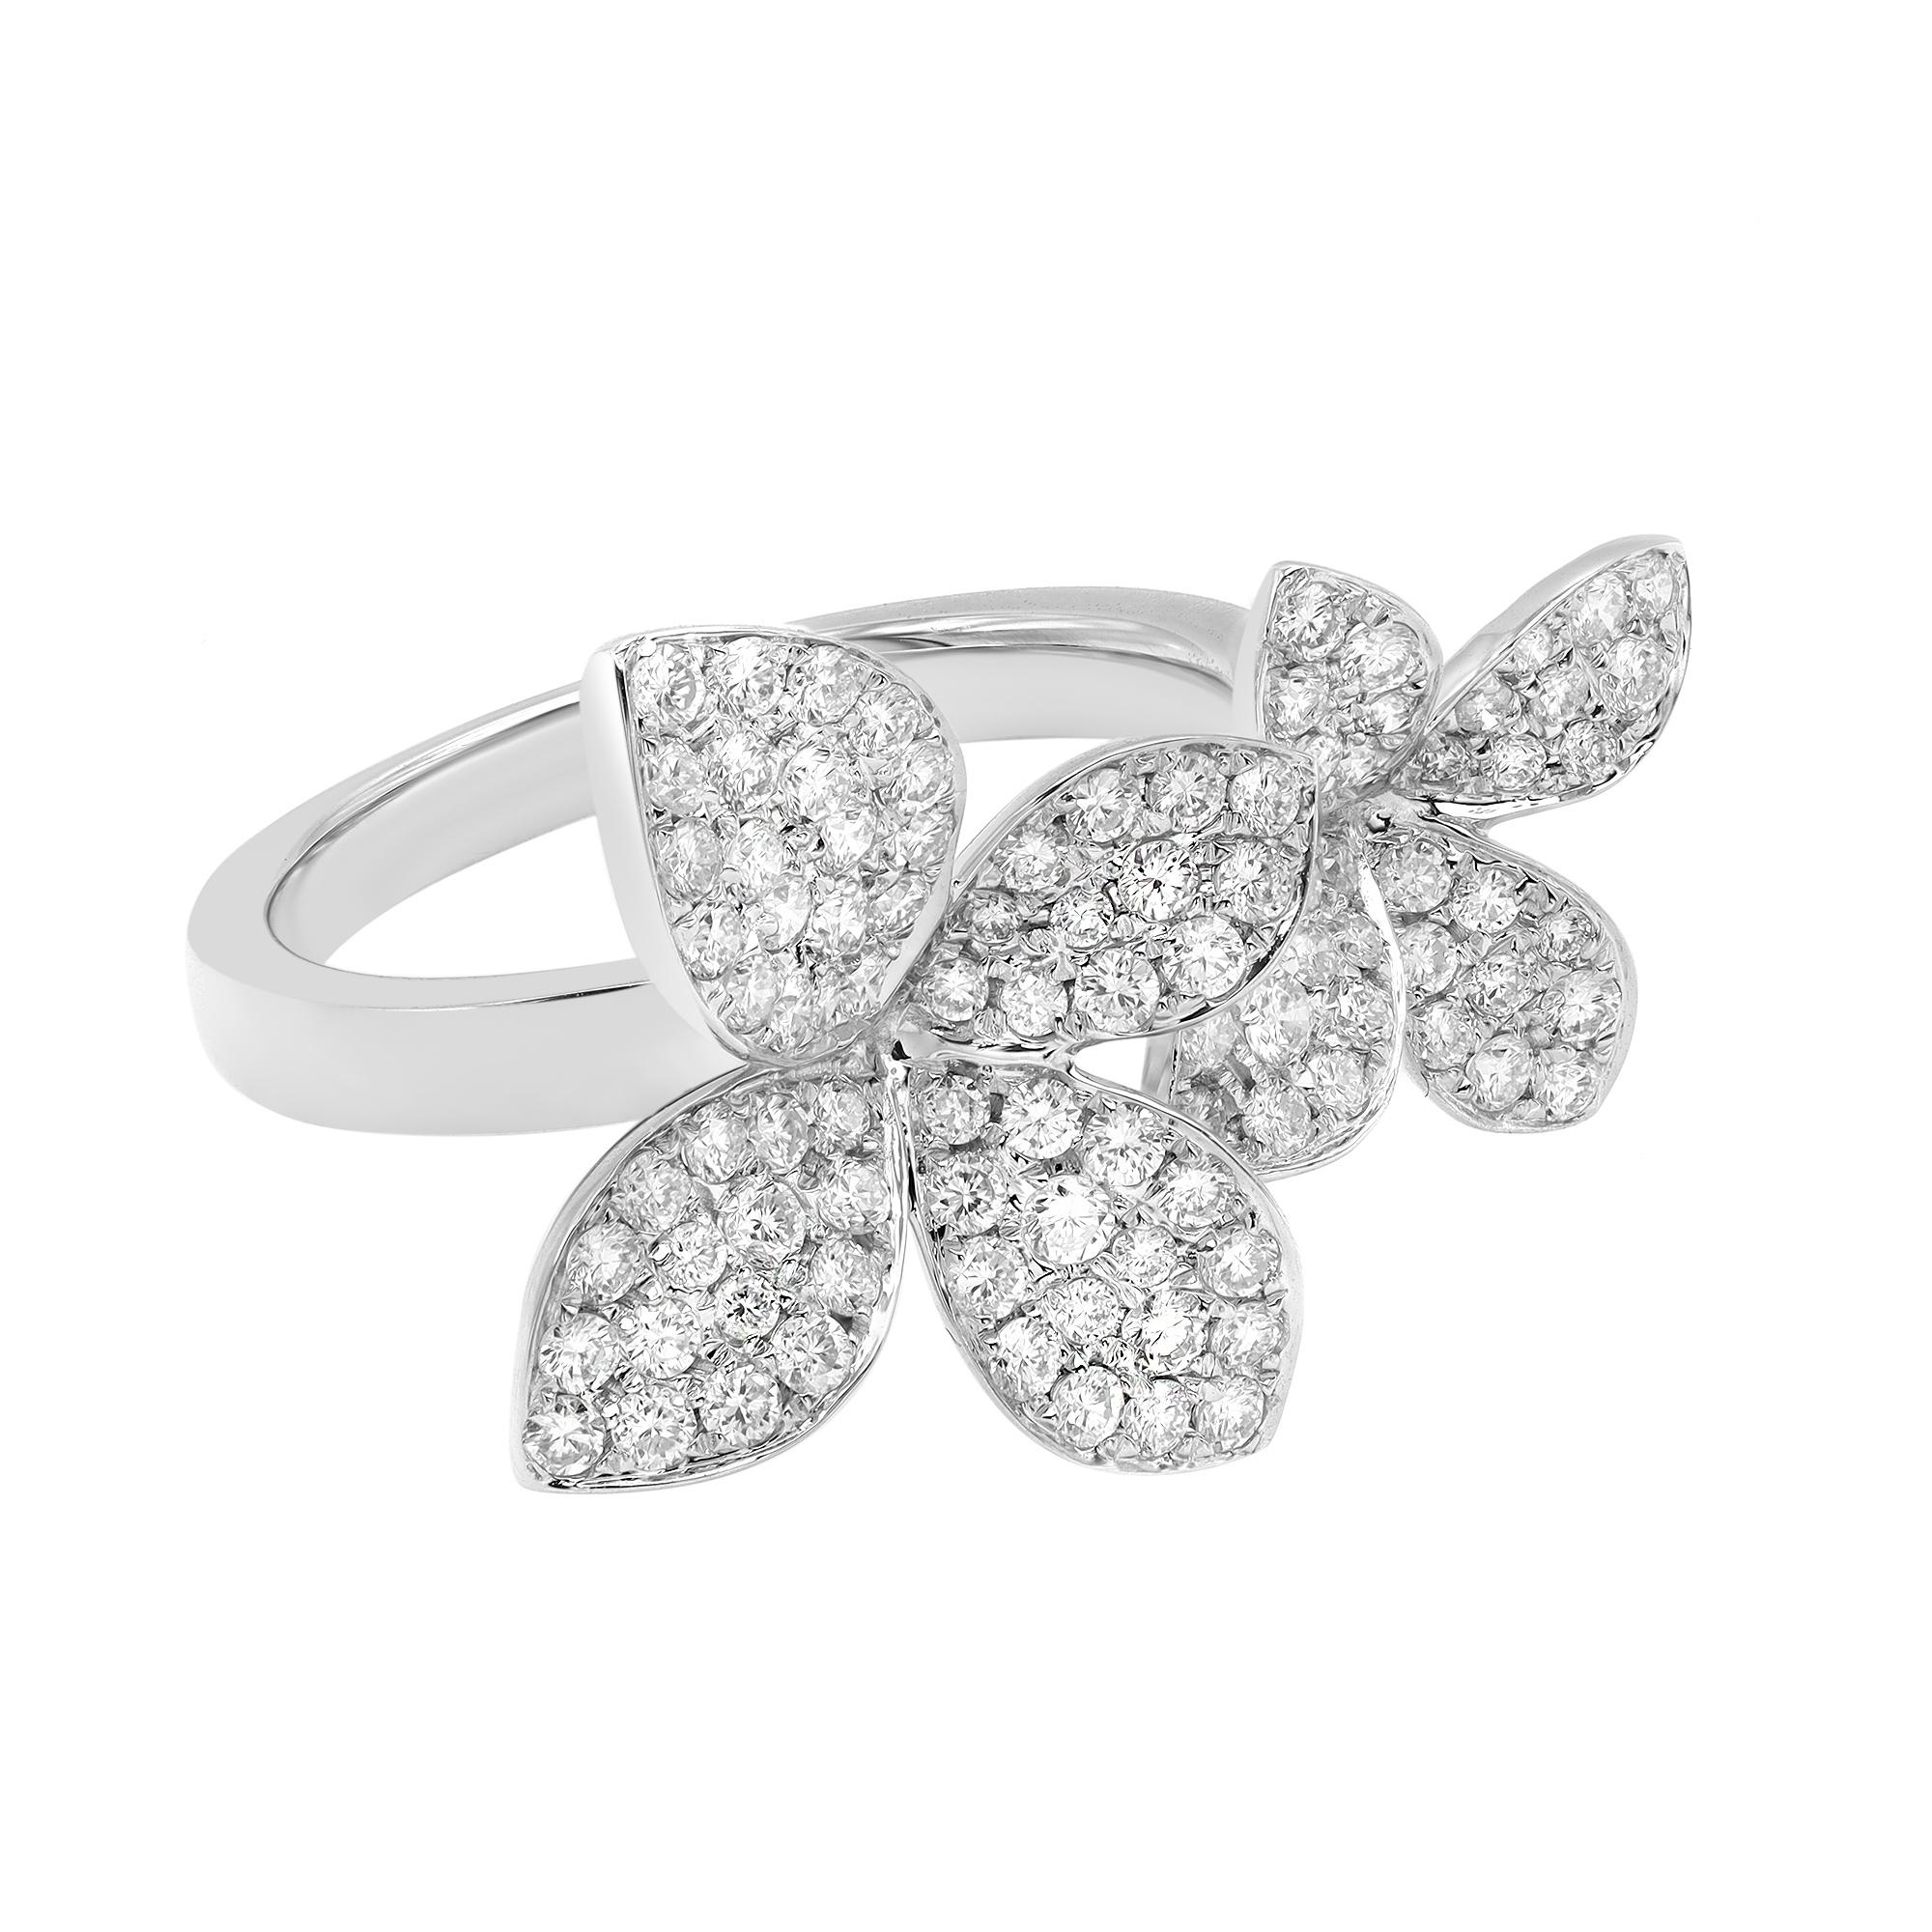 Fun and beautiful diamond double flower cocktail ring. This piece features two beautifully crafted flowers in 18k white gold, encrusted with dazzling round cut diamonds. A great pick for any occasion. Total diamond weight: 0.97 carat. Diamond